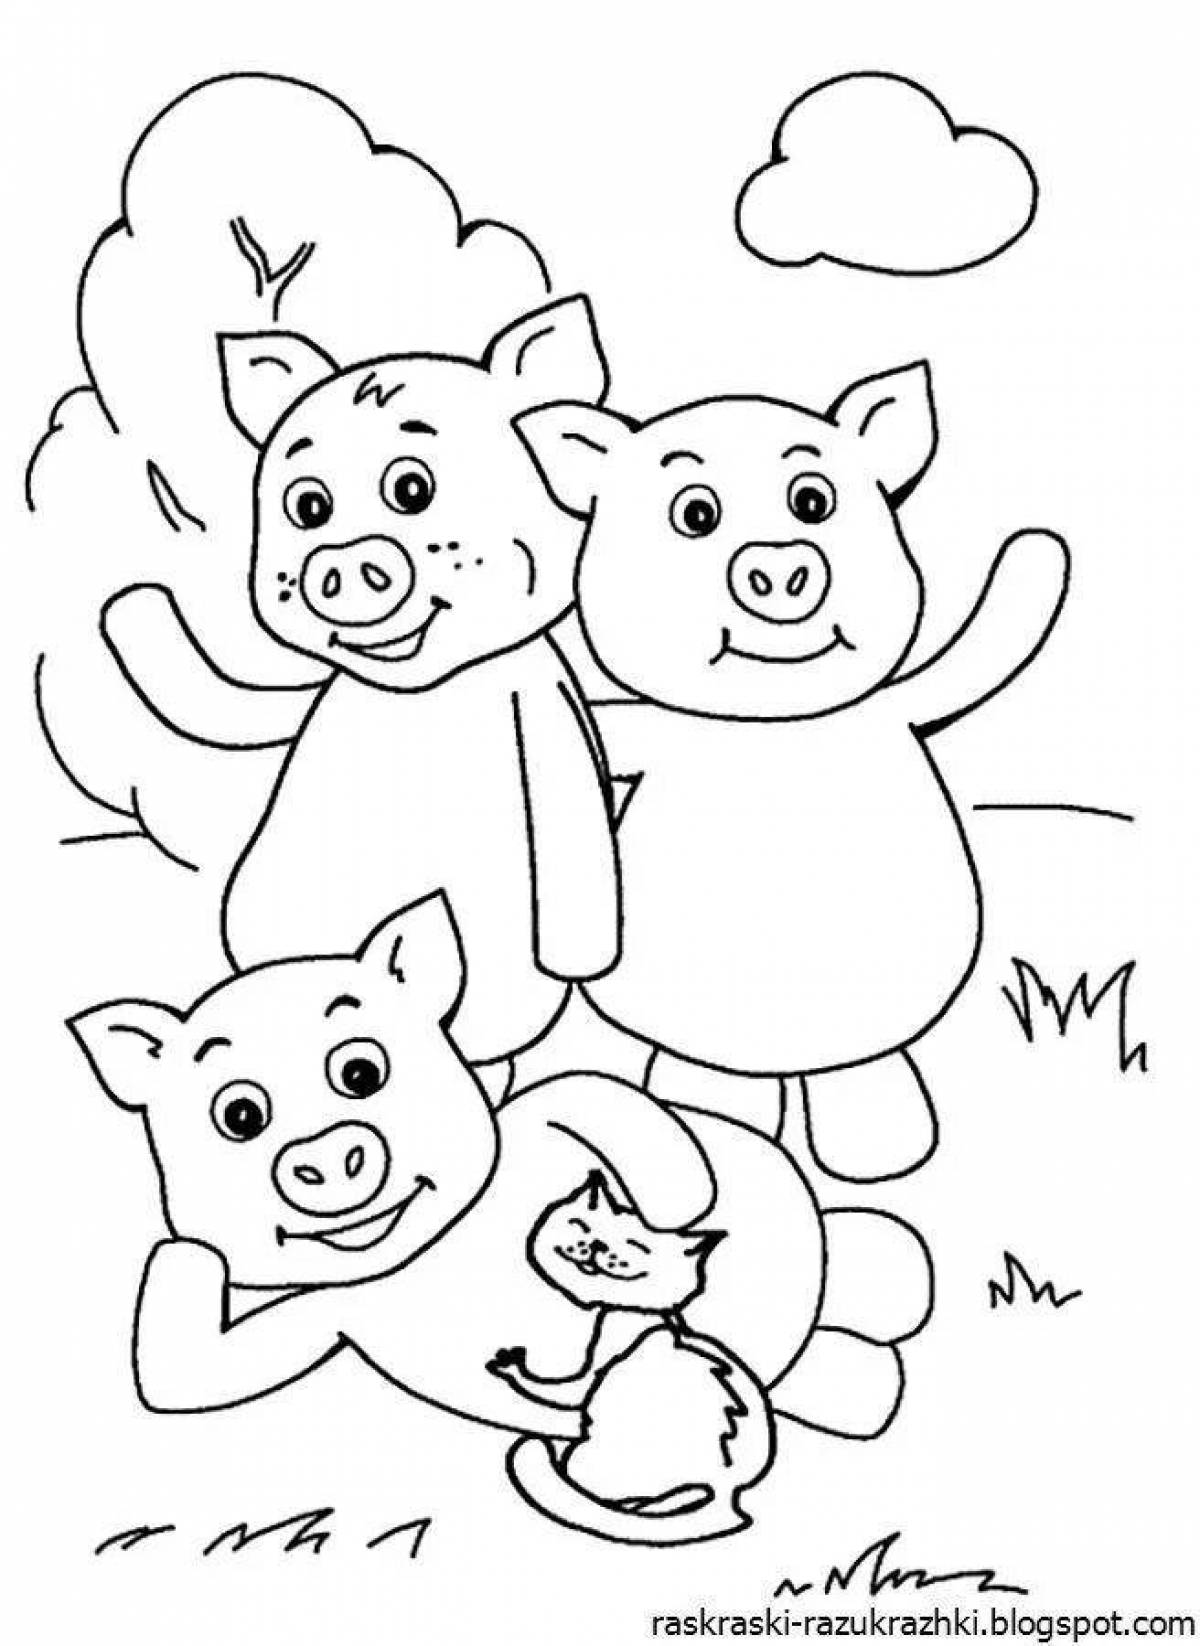 Adorable Three Little Pigs coloring book for preschoolers